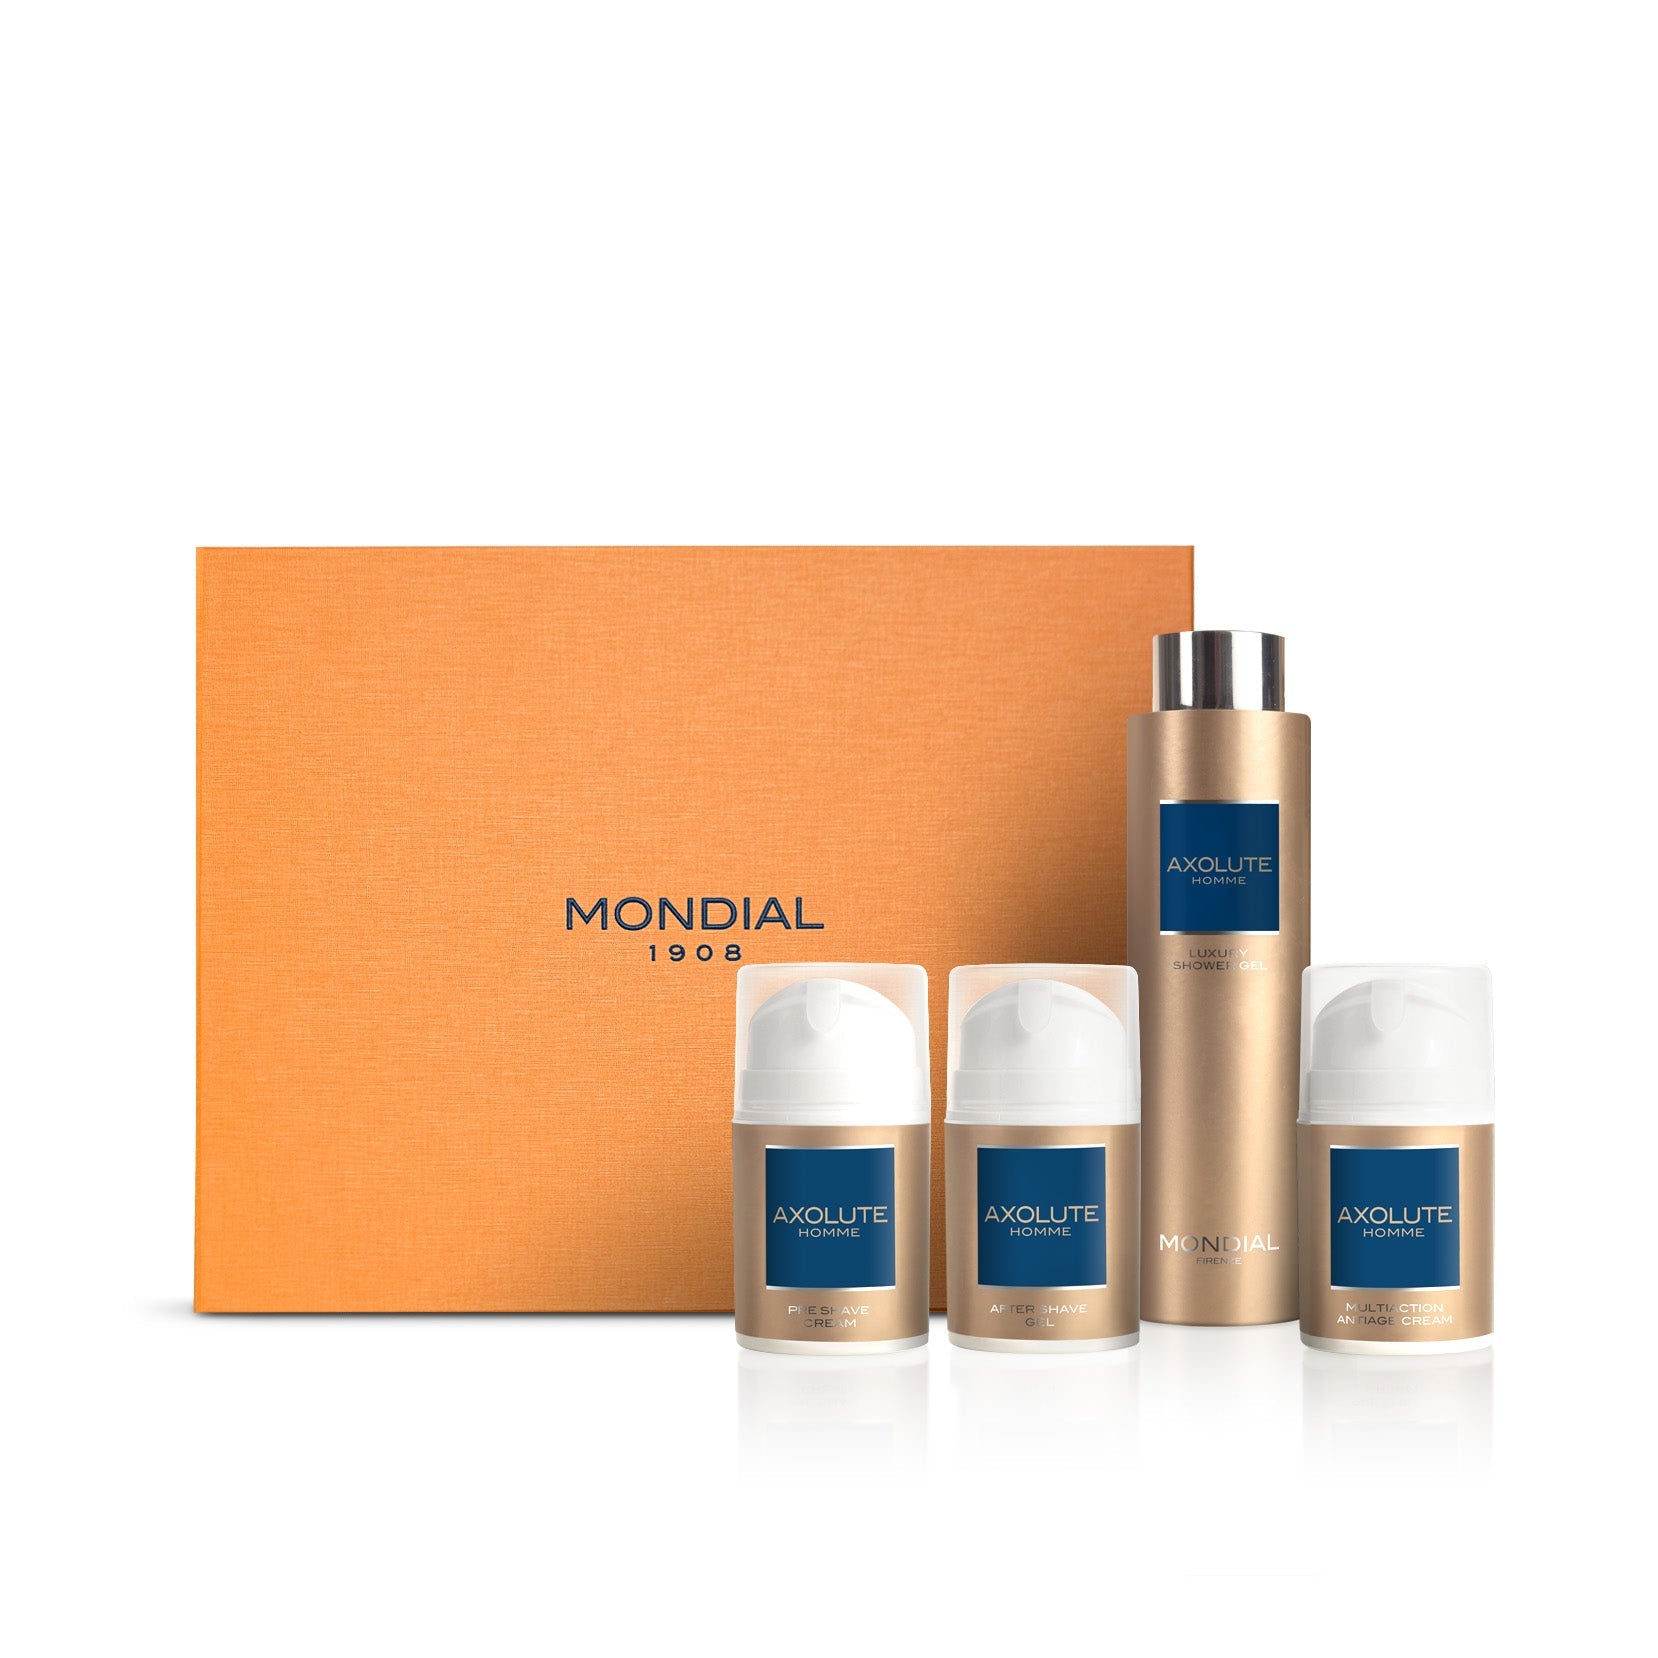 Care Axolute Shave Gift Mondial Royal: – Gel EU Shower with 1908 Set Cream & Anti-Aging Shaving